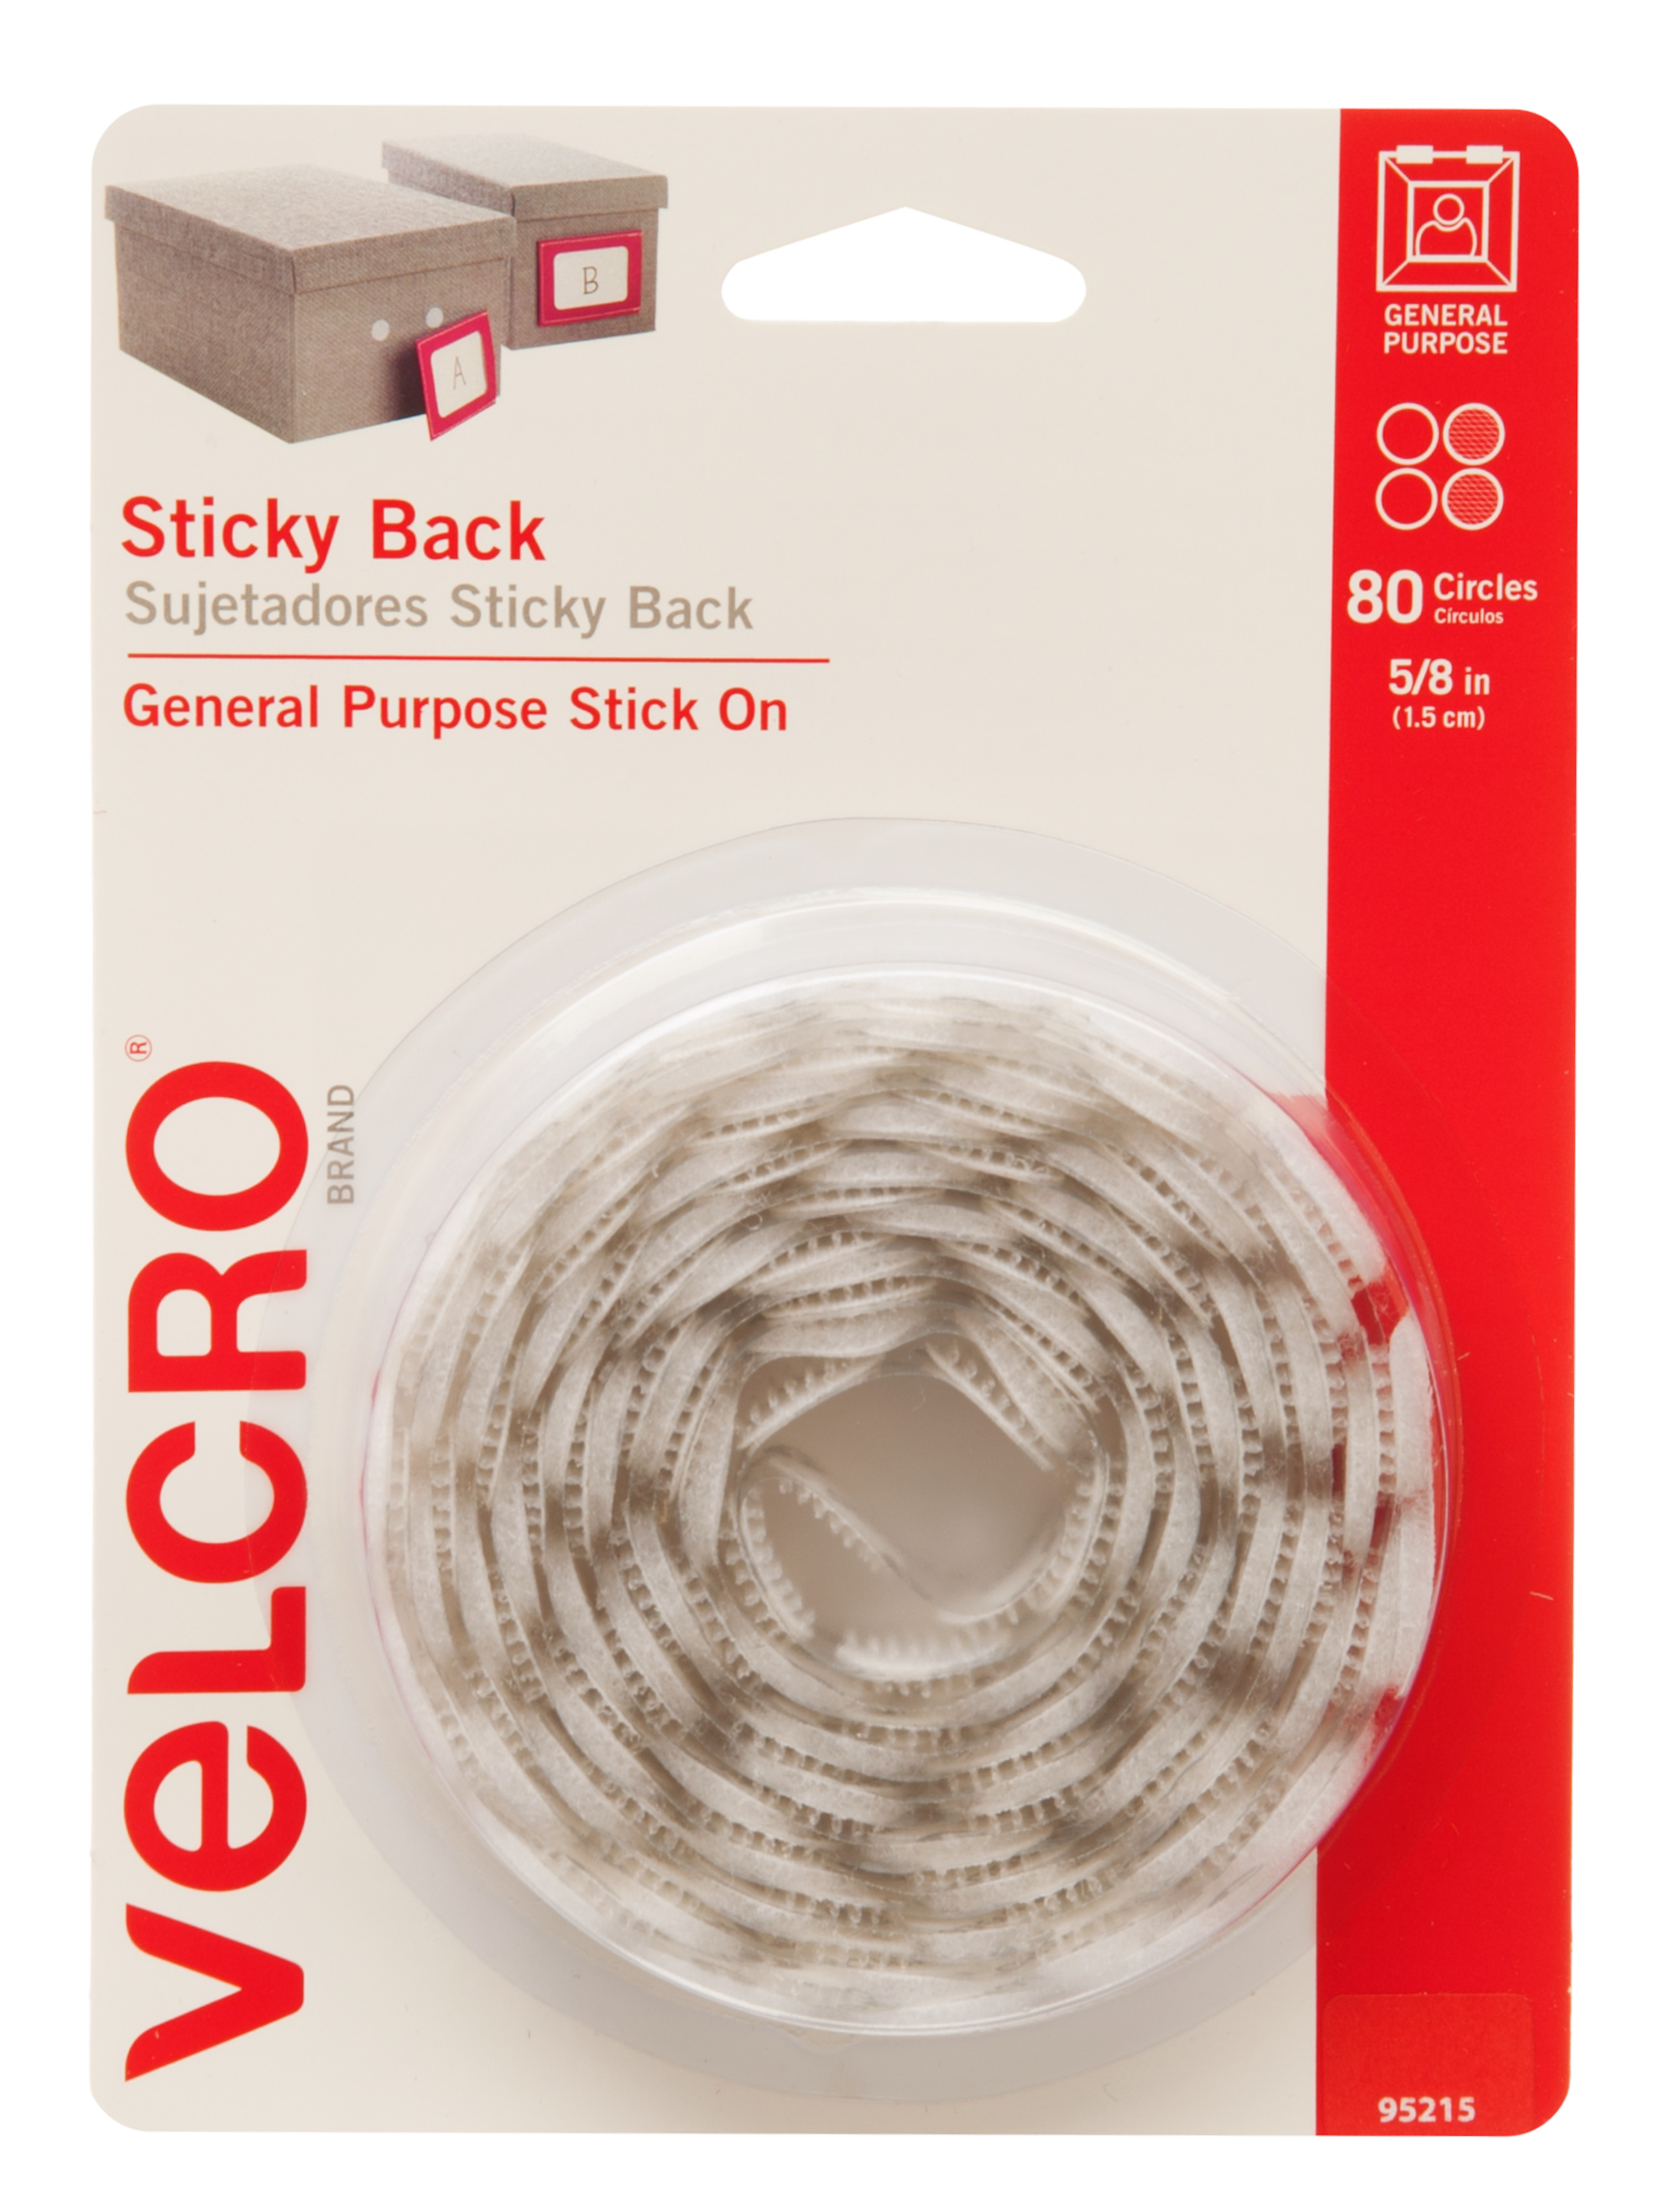 VELCRO Brand Dots with Adhesive White  Sticky Back Round Hook and Loop  Closures for Organizing, Arts and Crafts, School Projects, 5/8in Circles 80  ct 